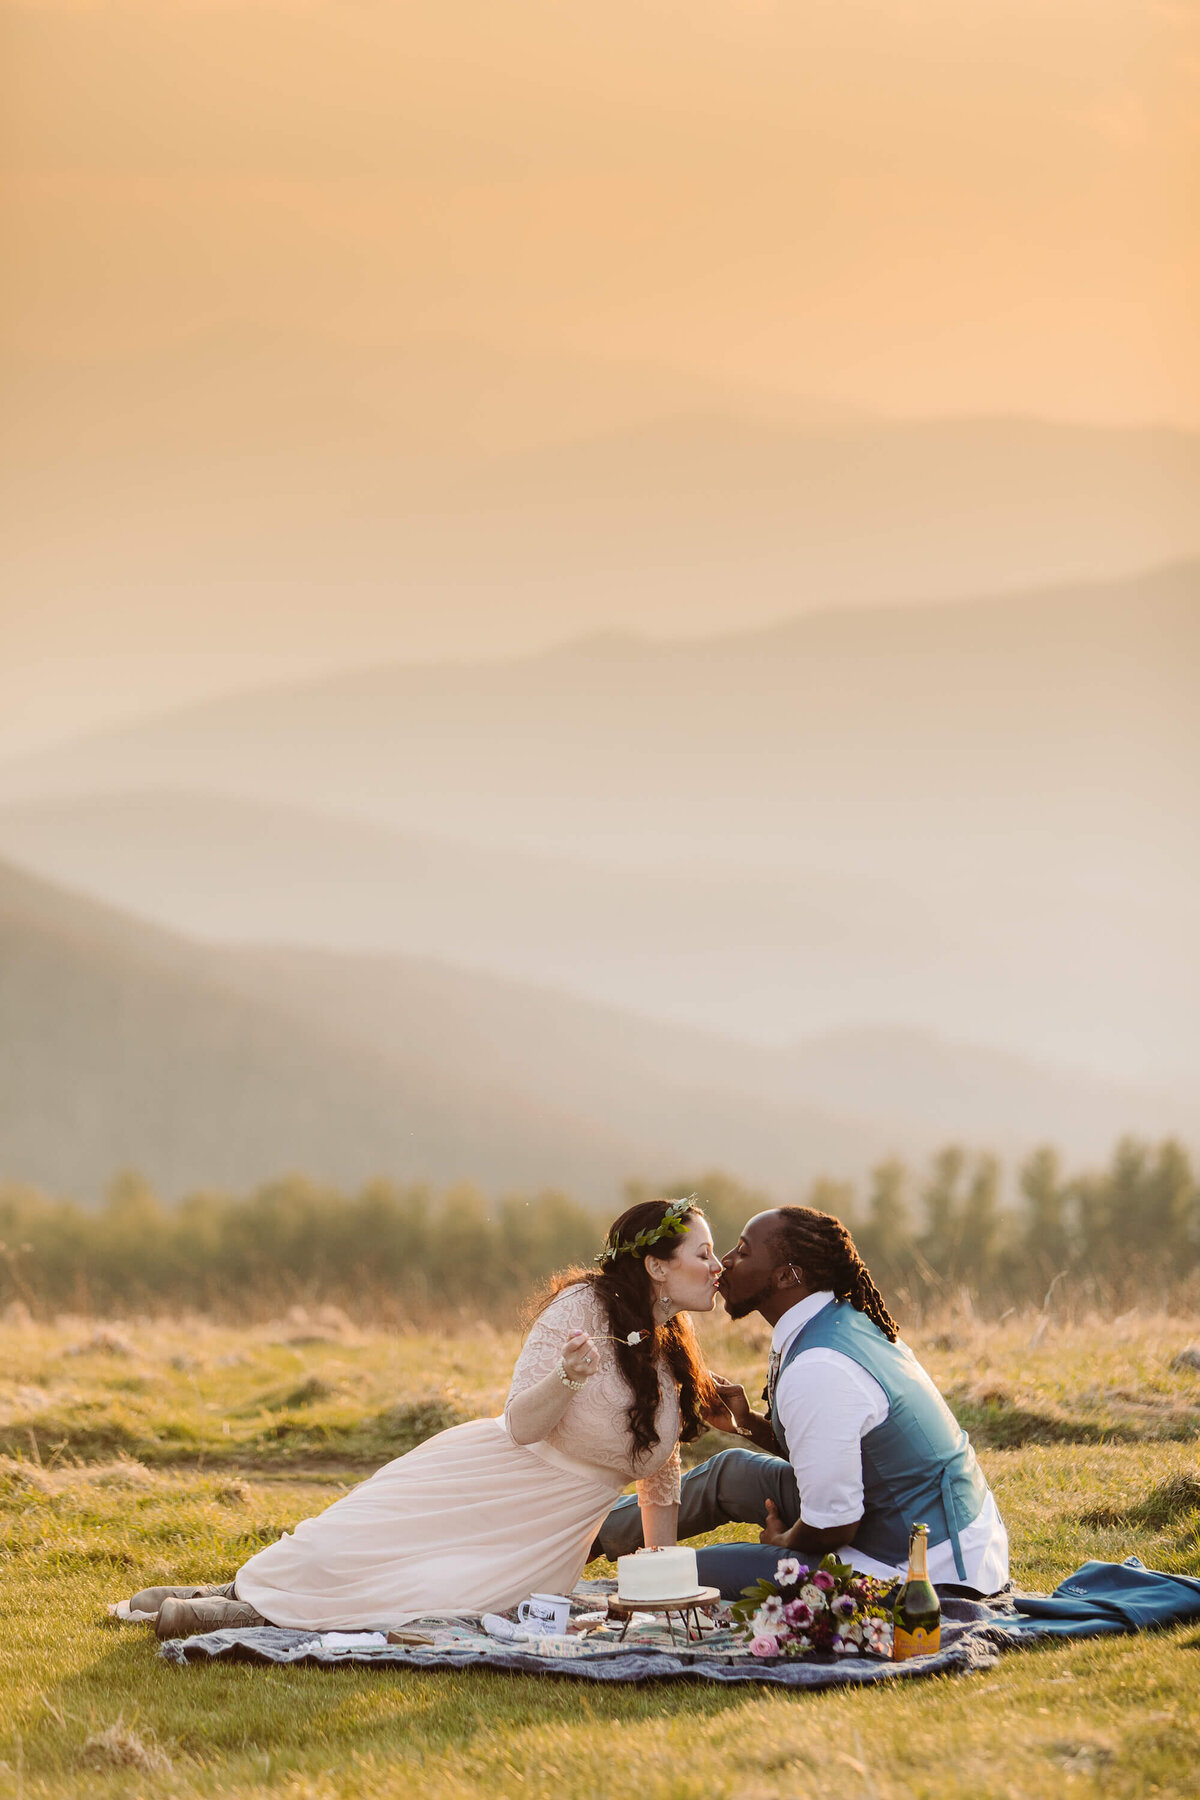 Max-Patch-Sunset-Mountain-Elopement-66